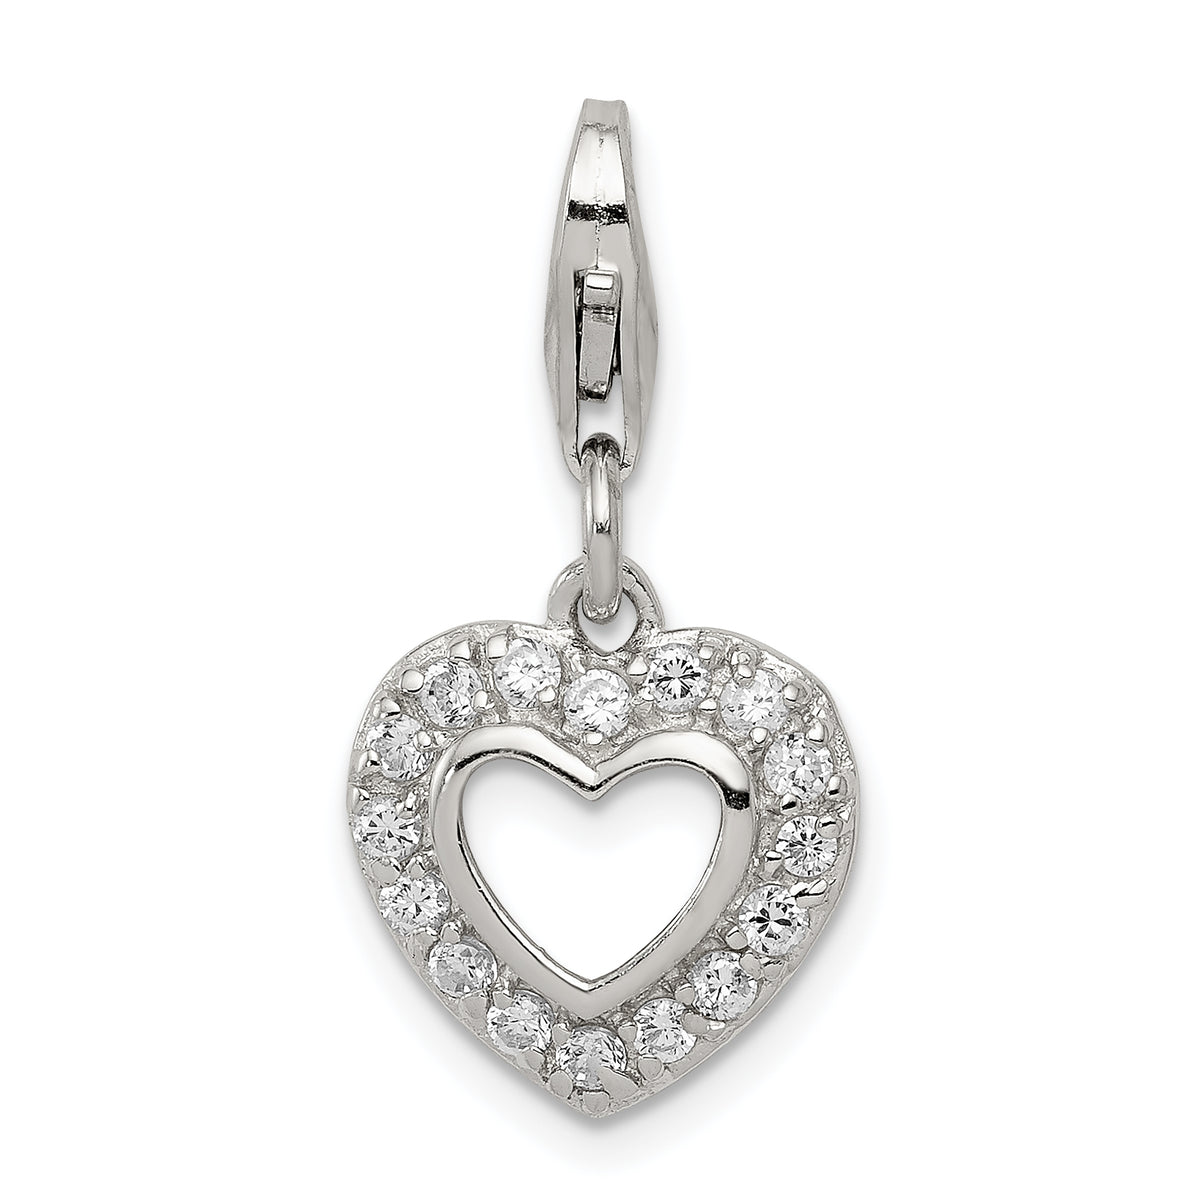 Sterling Silver CZ Heart Charm